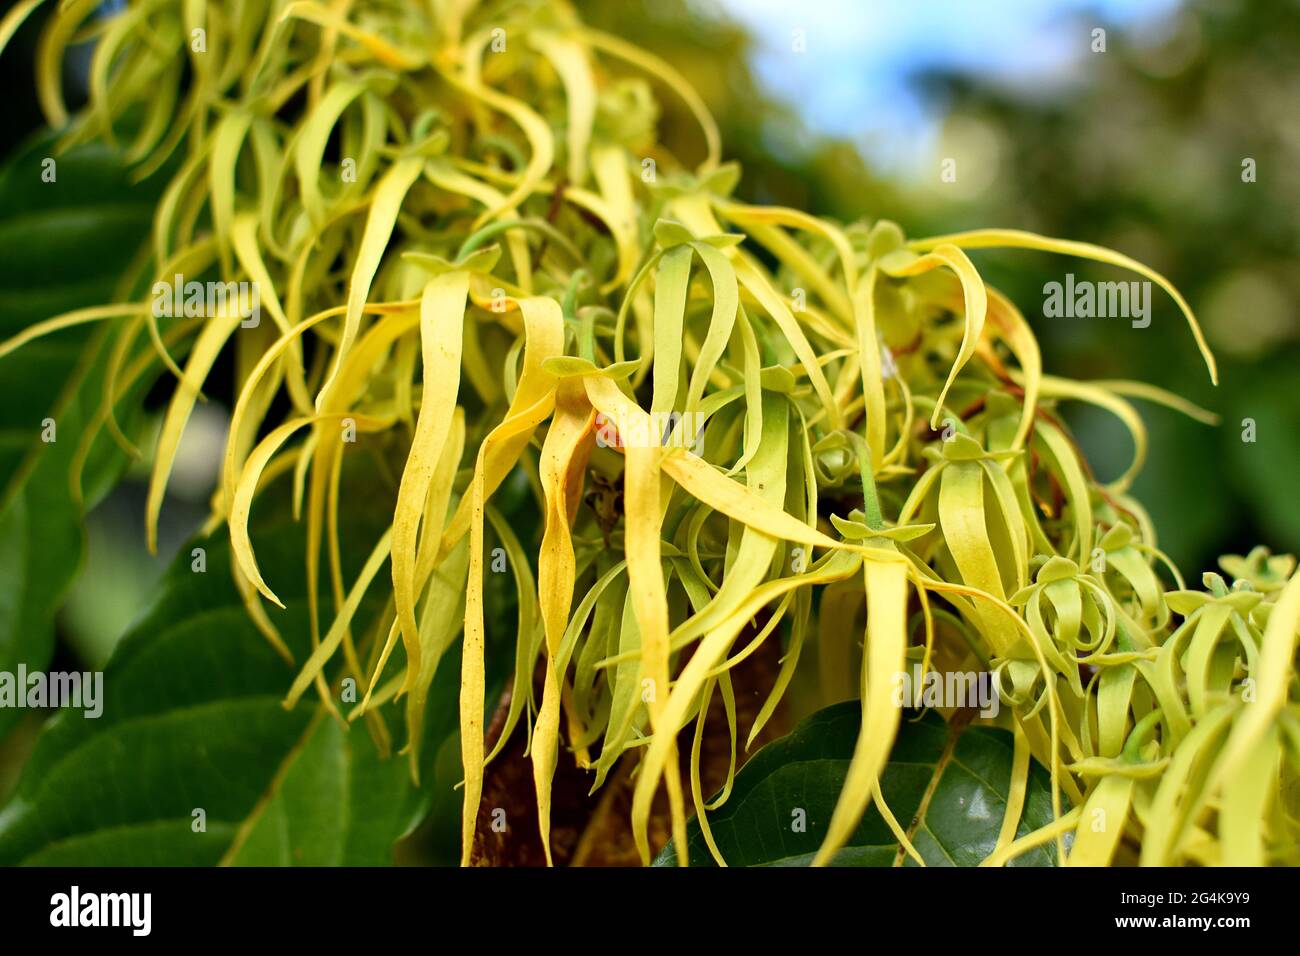 The Marquesas Islands in French Polynesia, Nuku Hiva: Ylang Ylang leaves, cananga odorata, fragrant plant. Ylang ylang essential oil is used in aromat Stock Photo